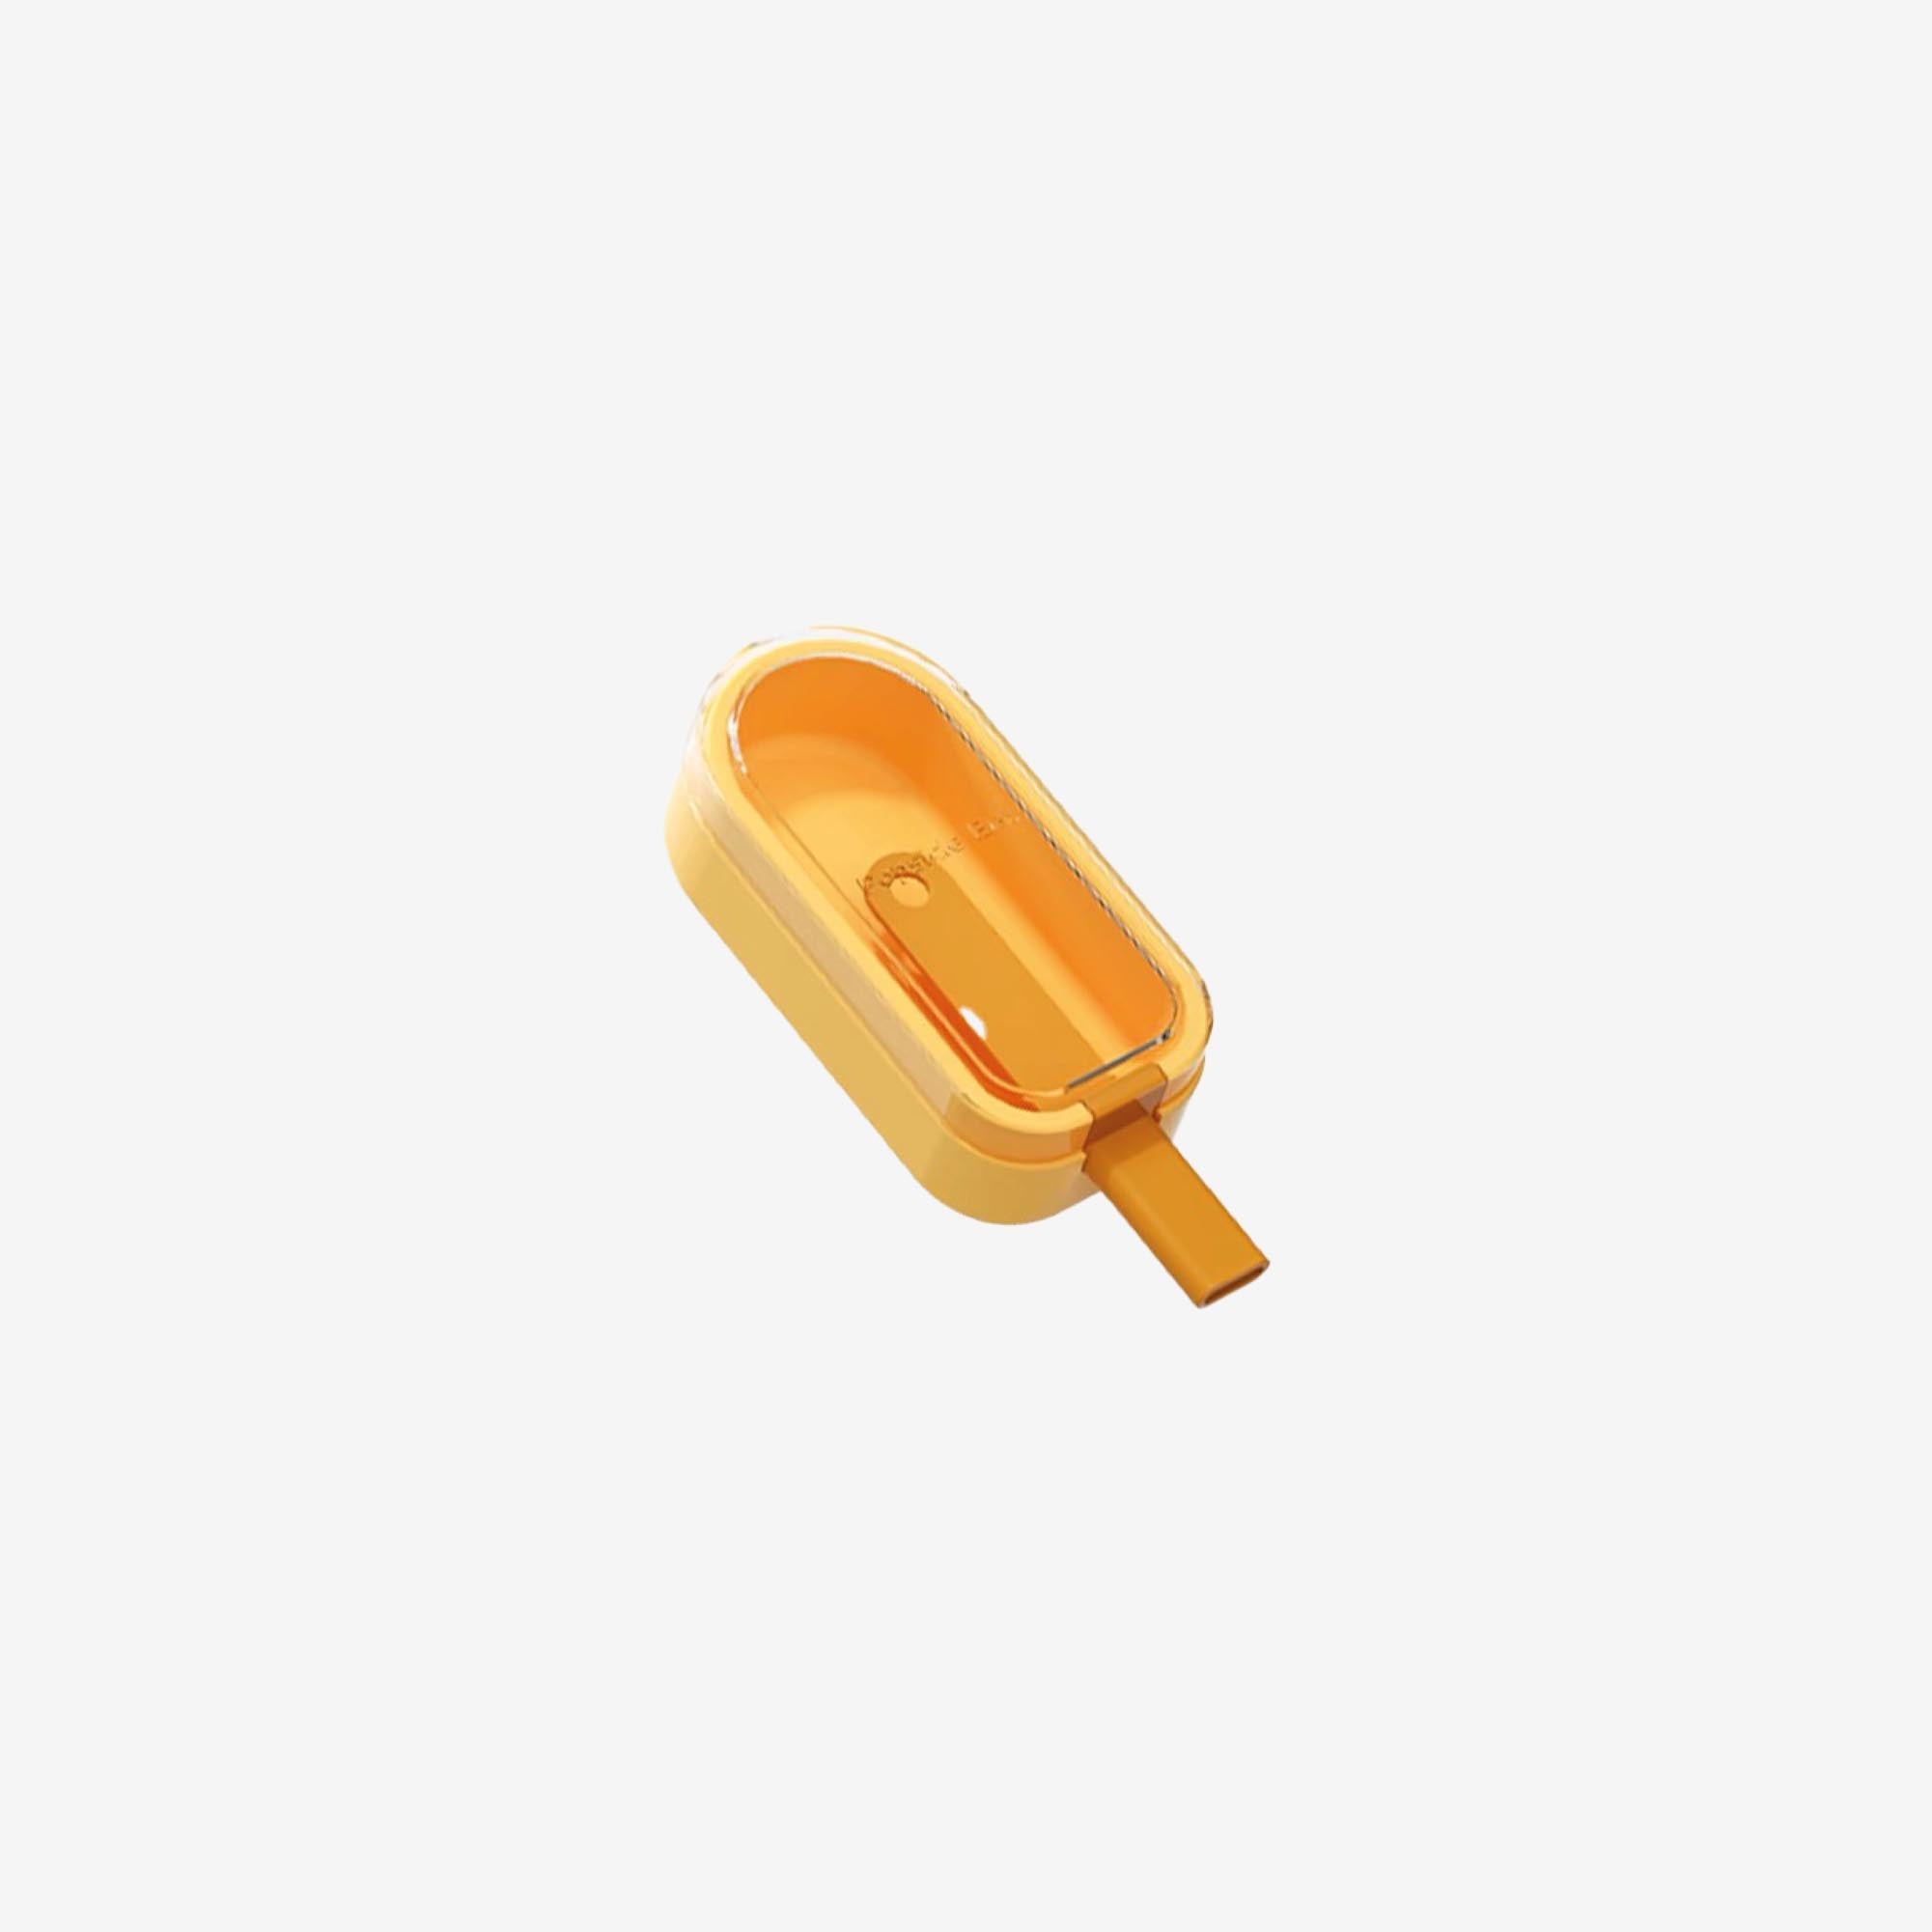 Popsicle Ice Mold